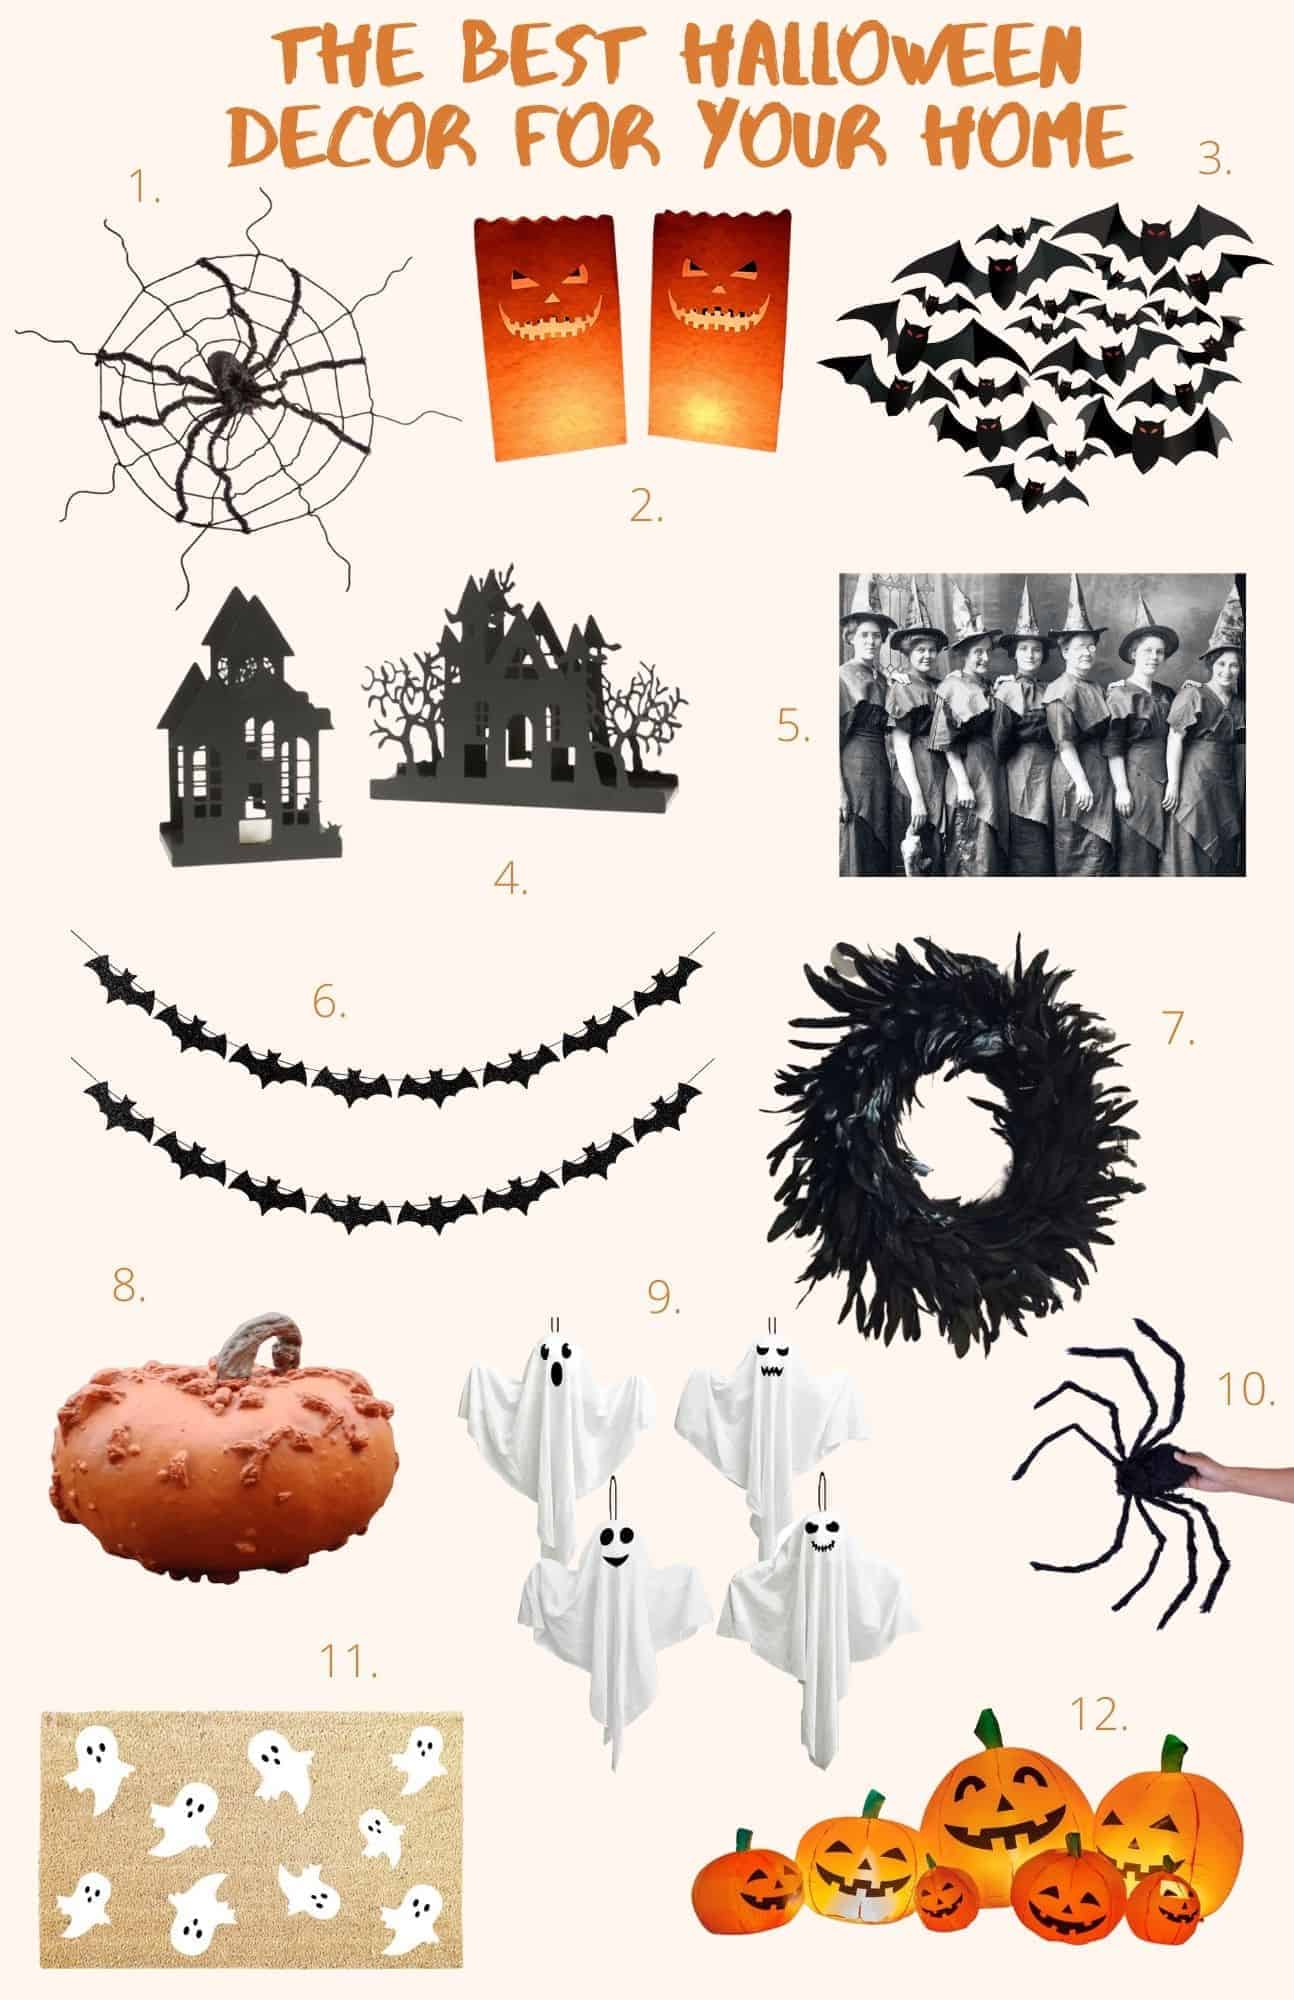 Halloween decoration collage for your home